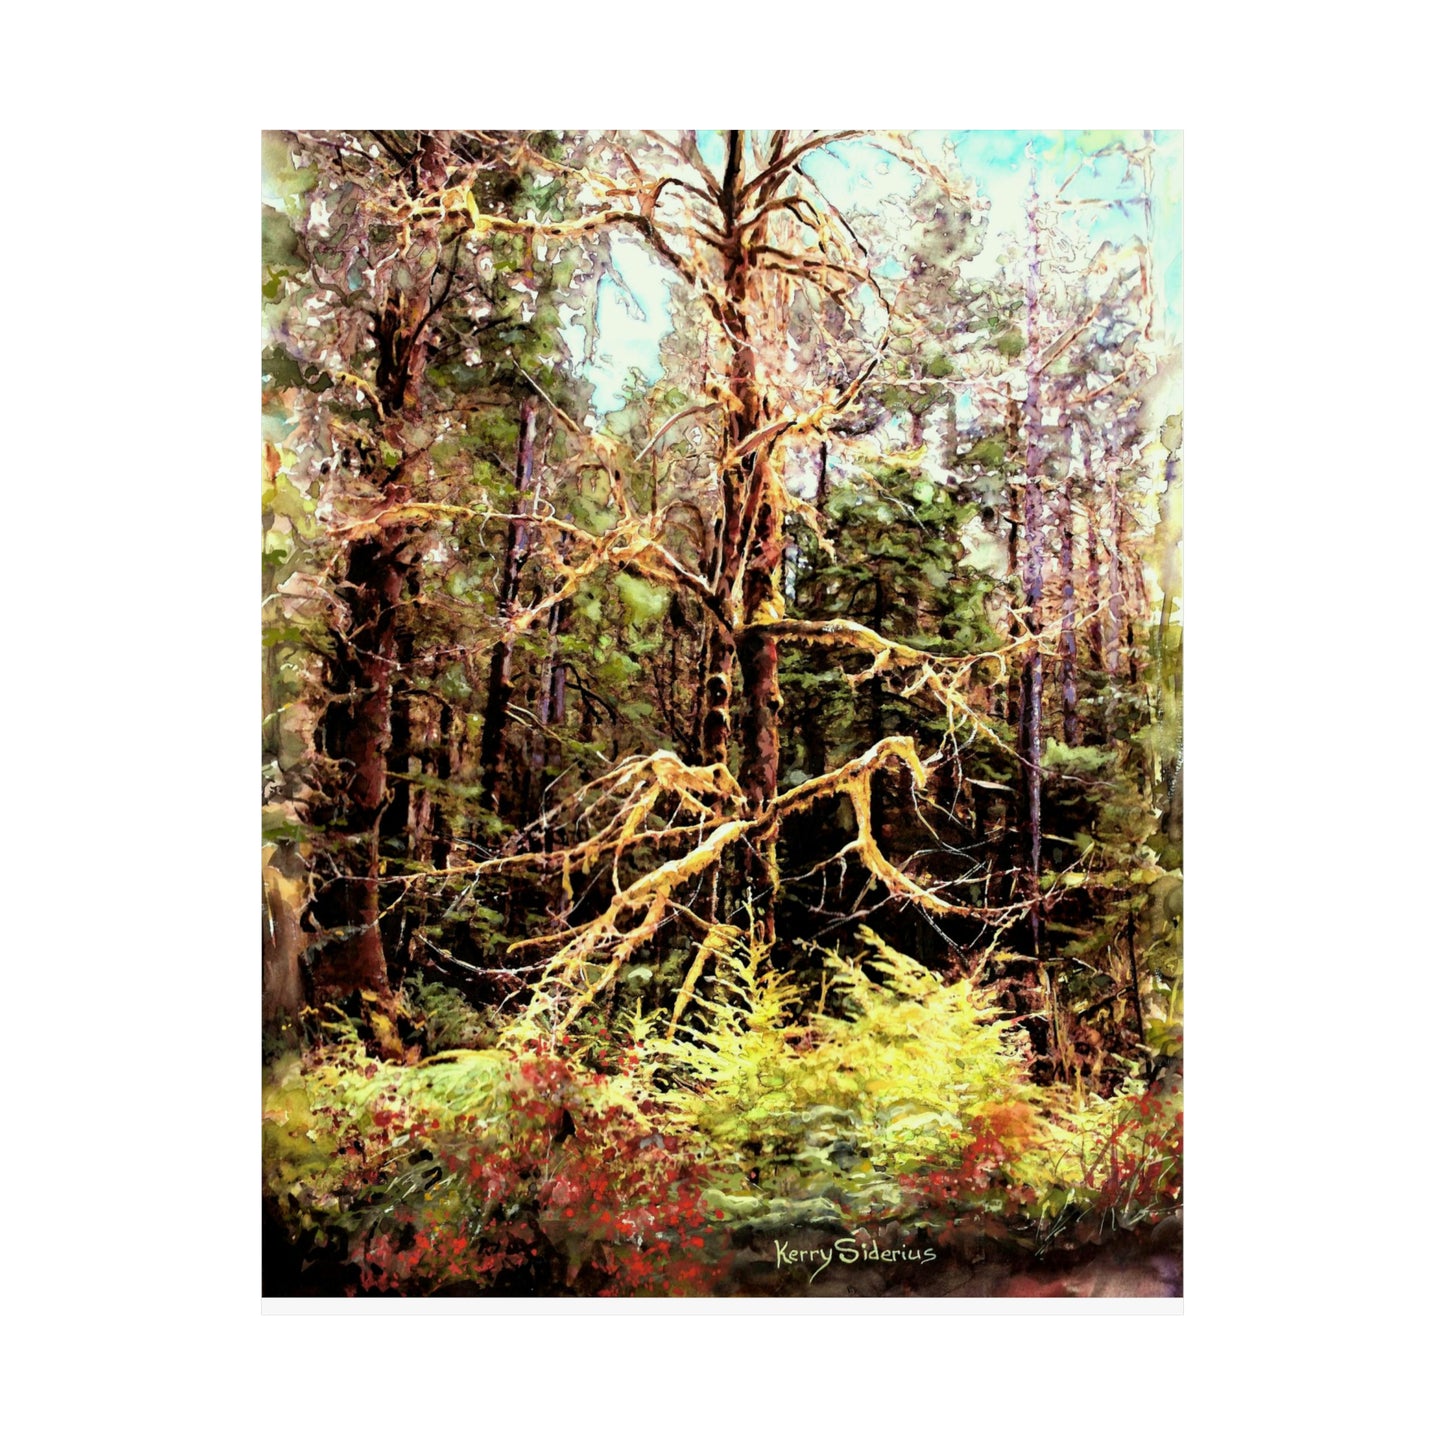 "Mossy Tree on Snoqualmie Pass" Archival Poster Print